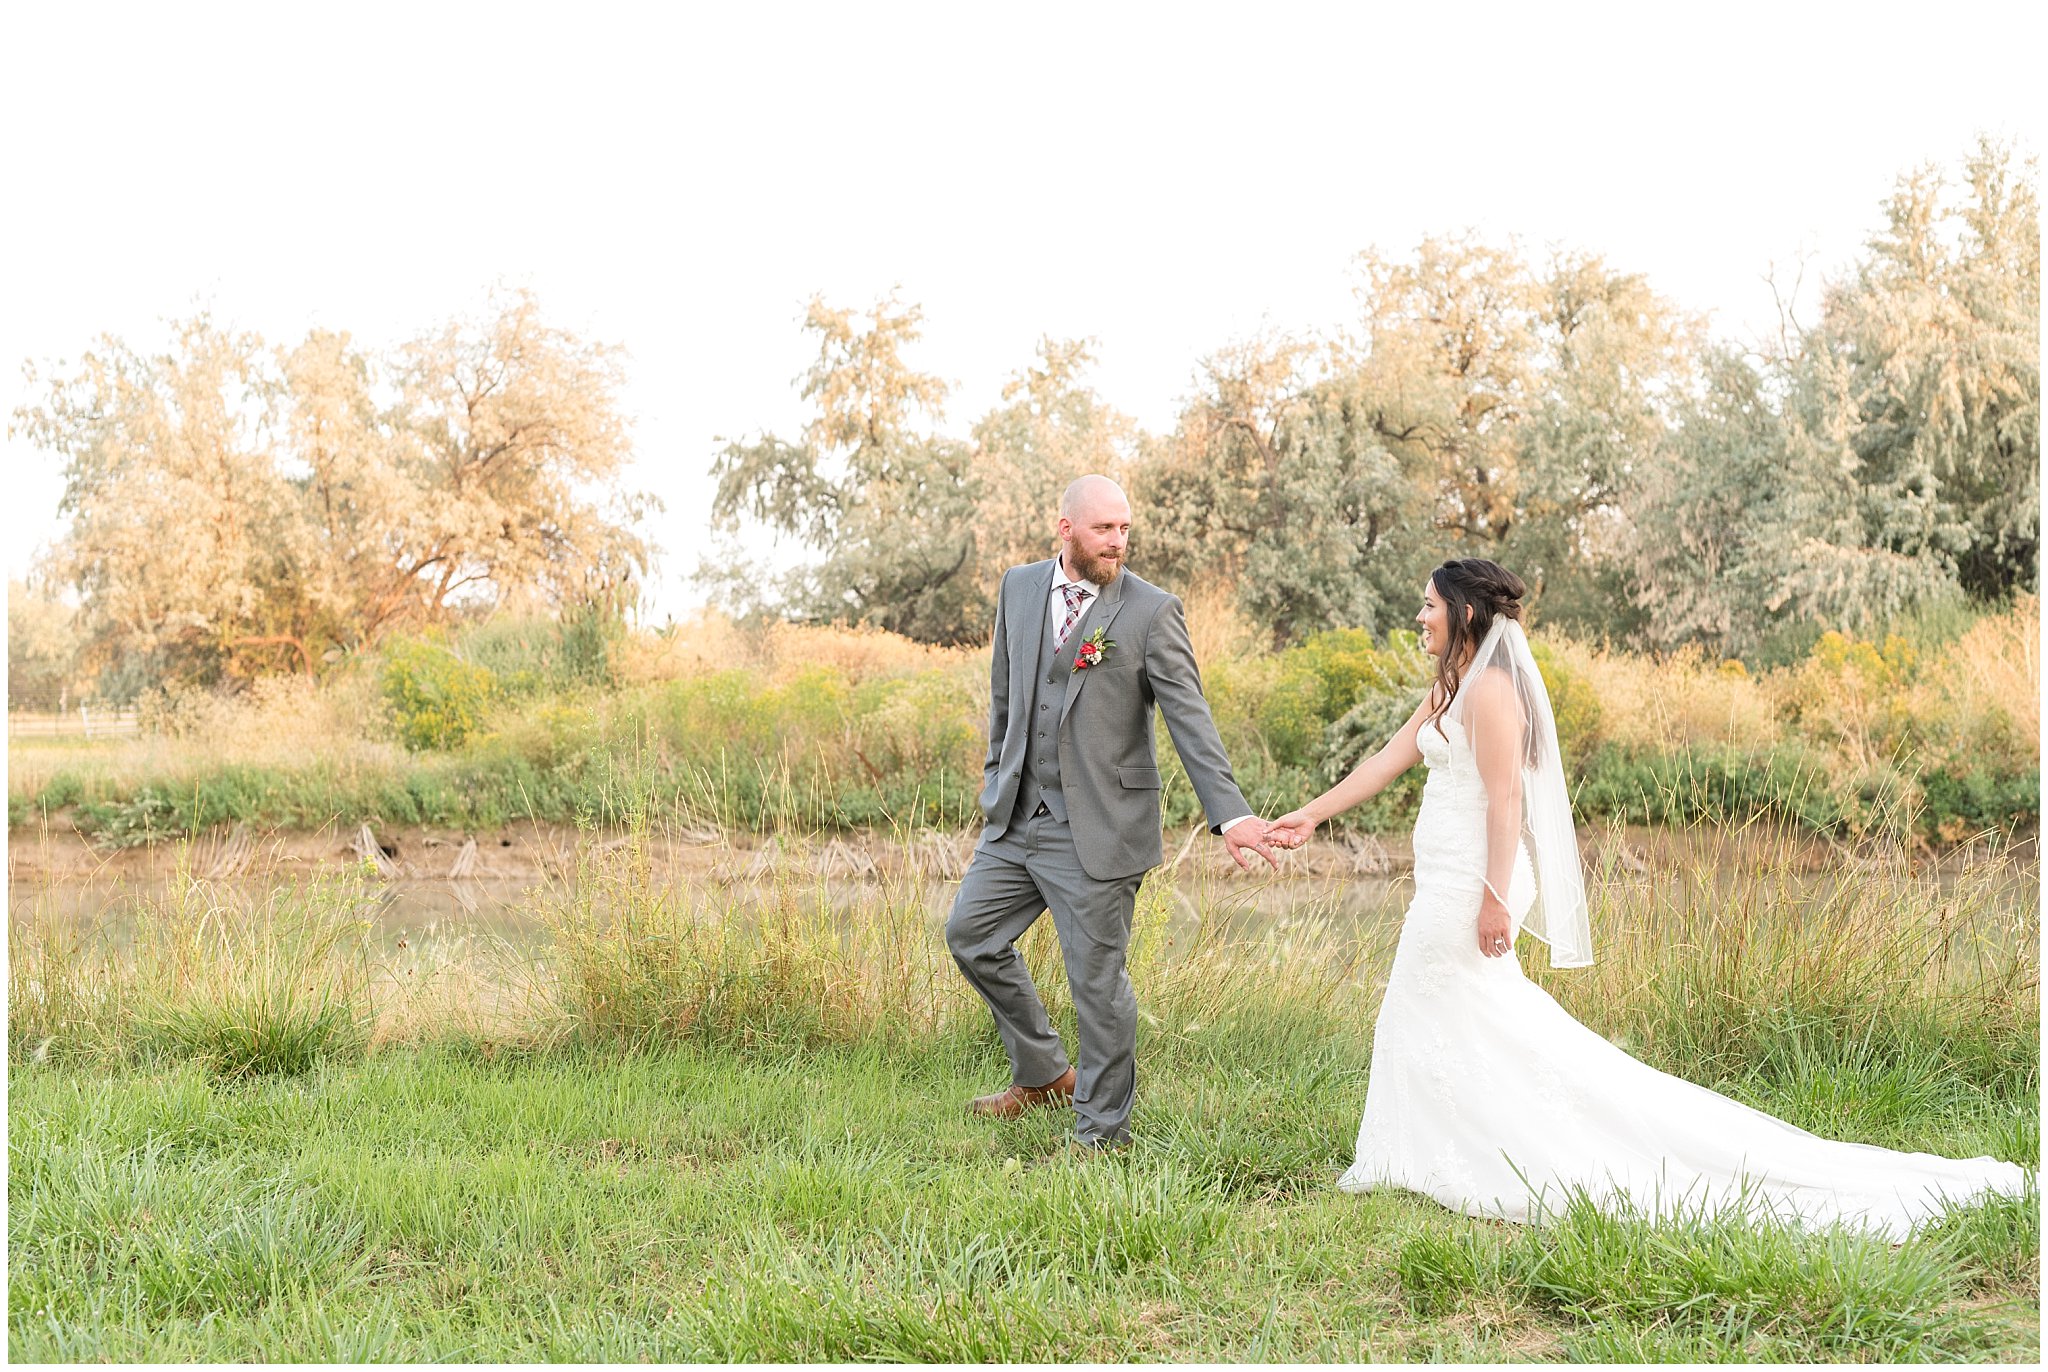 Bride and groom walking together near a pond during sunset portraits | Red and Grey wedding | Davis County Outdoor Wedding | Jessie and Dallin Photography